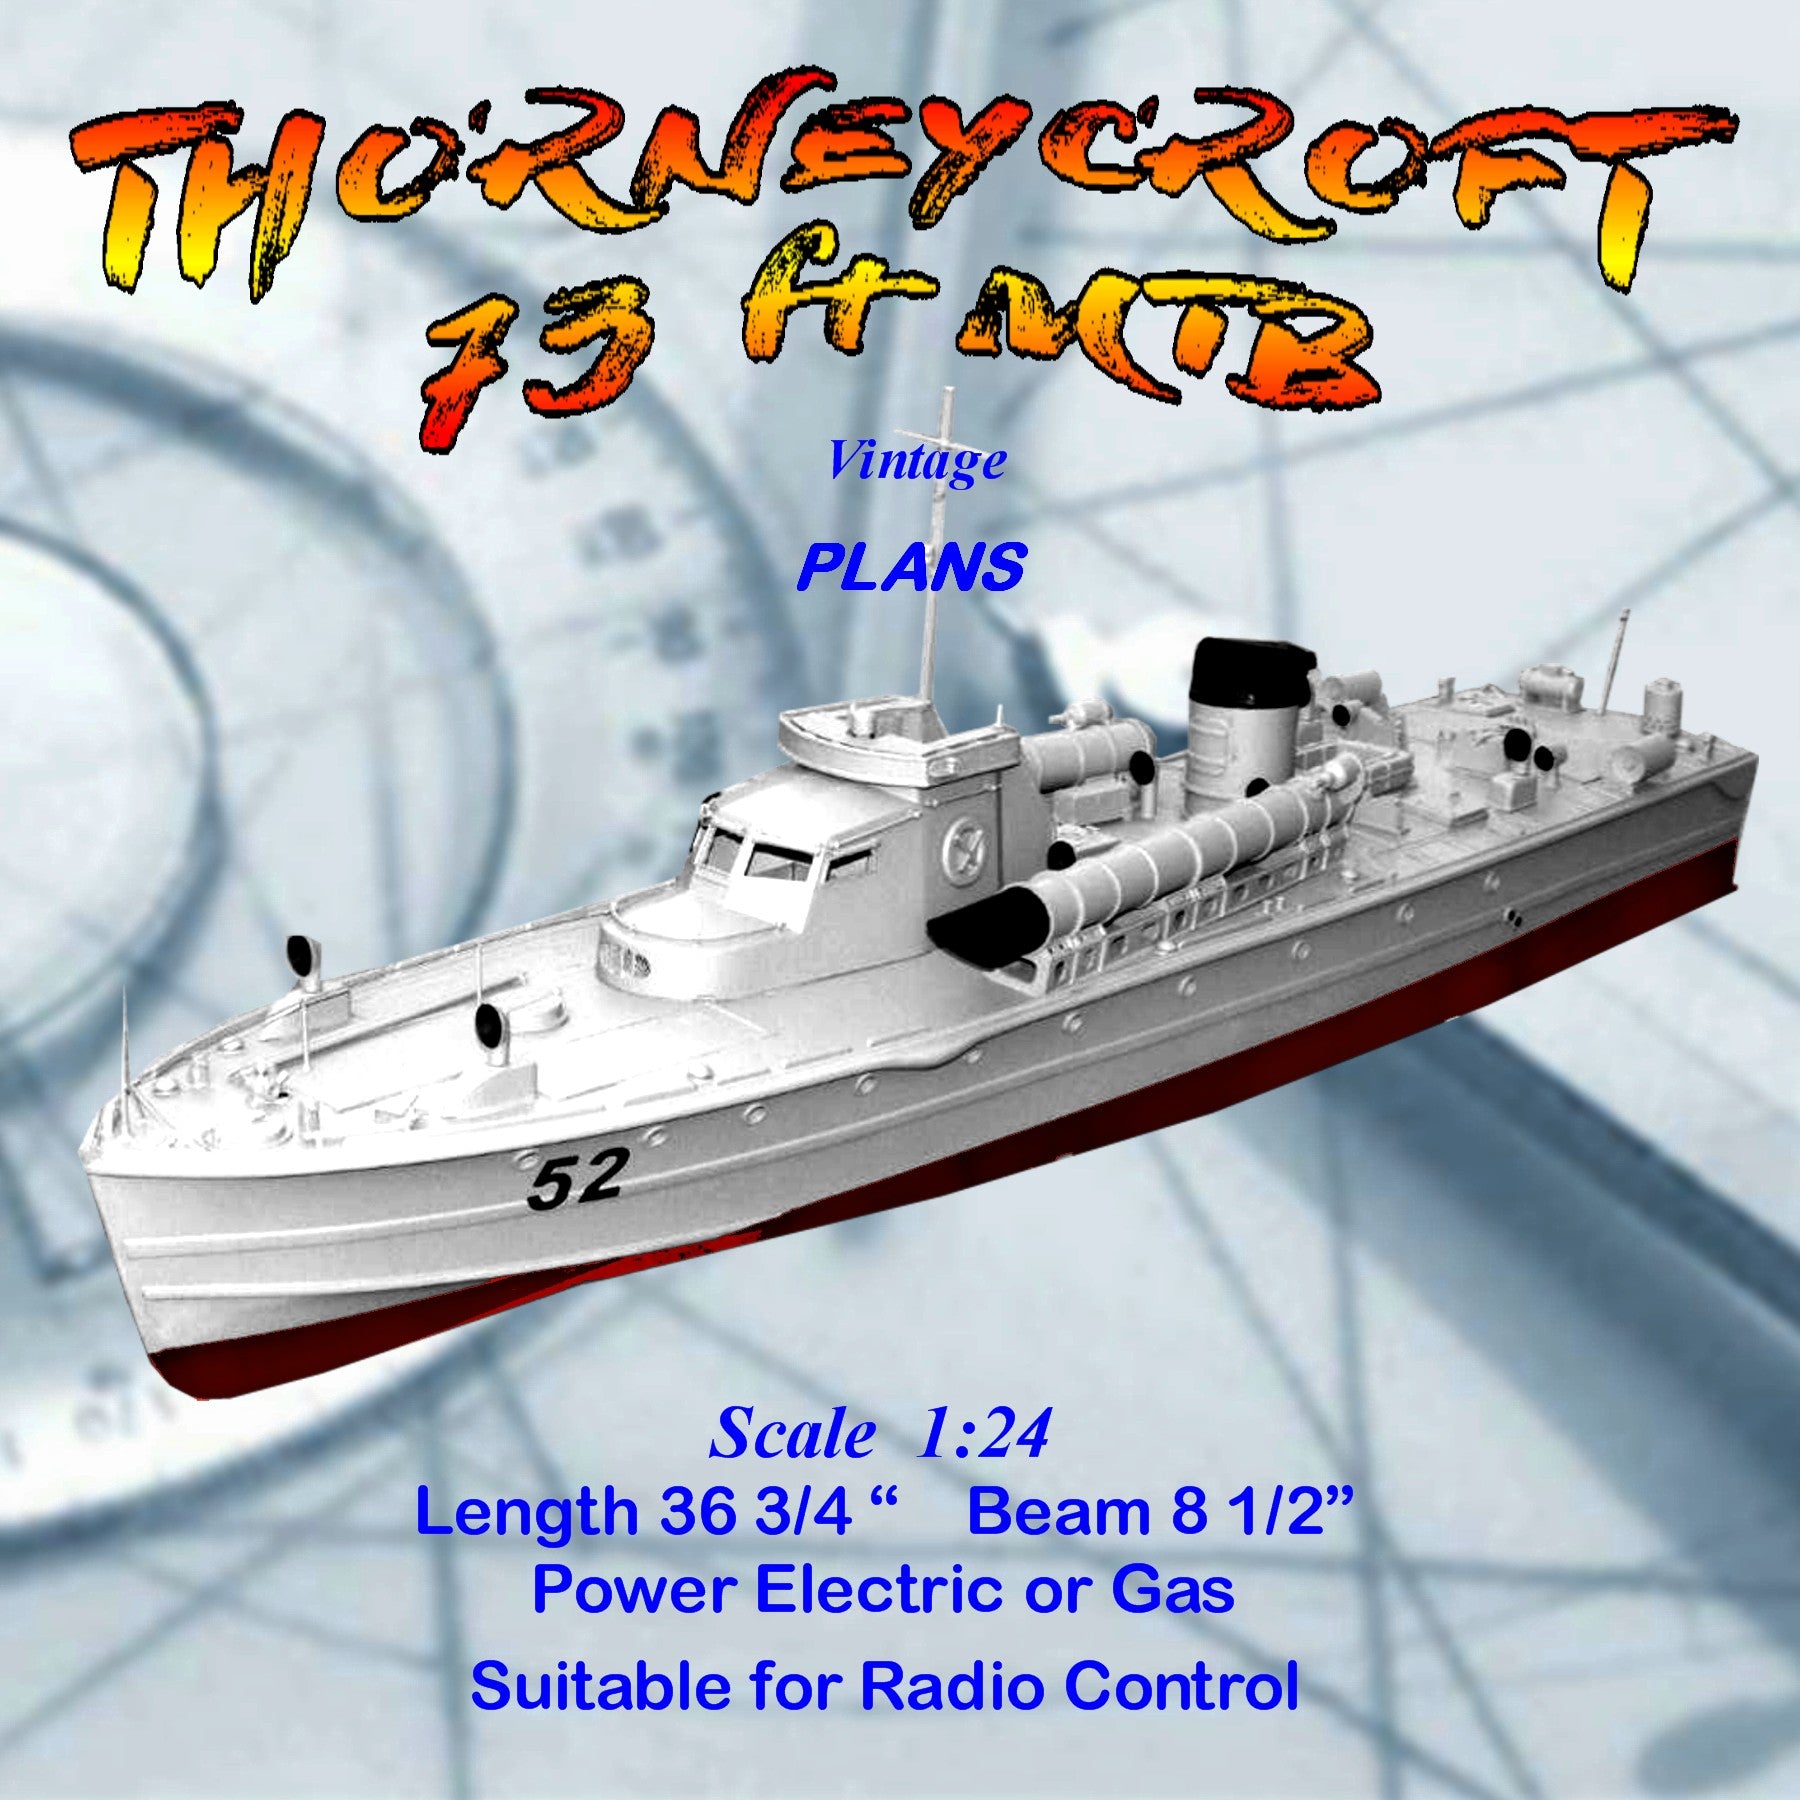 full size printed plan scale 1:24 thorneycroft 73 ft mtb power electric or gas  suitable for radio control